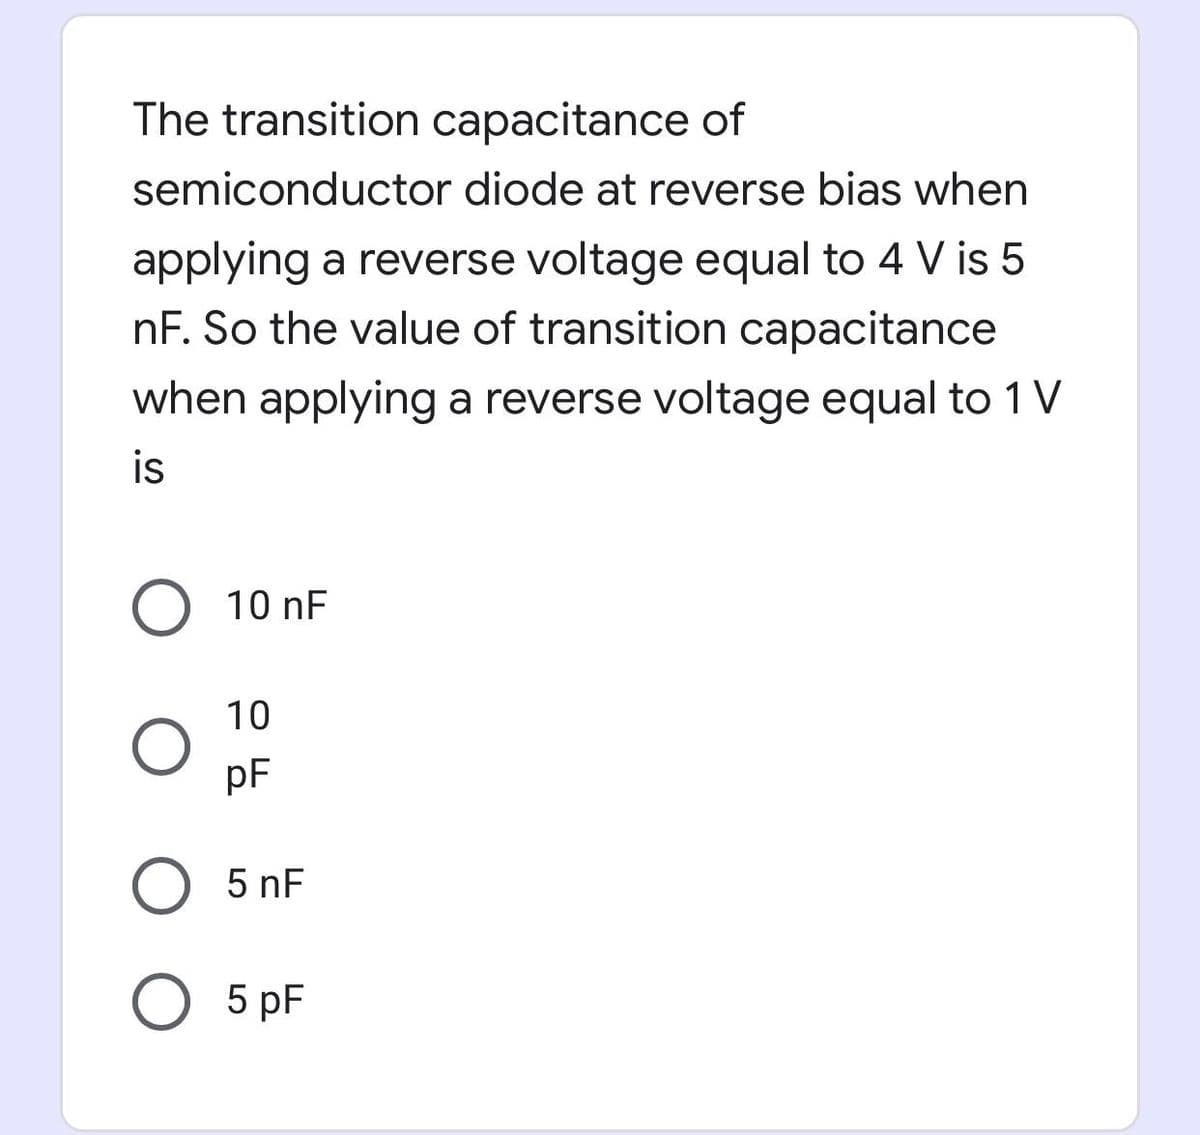 The transition capacitance of
semiconductor diode at reverse bias when
applying a reverse voltage equal to 4 V is 5
nF. So the value of transition capacitance
when applying a reverse voltage equal to 1 V
is
10 nF
10
pF
O 5 nF
O 5 pF
